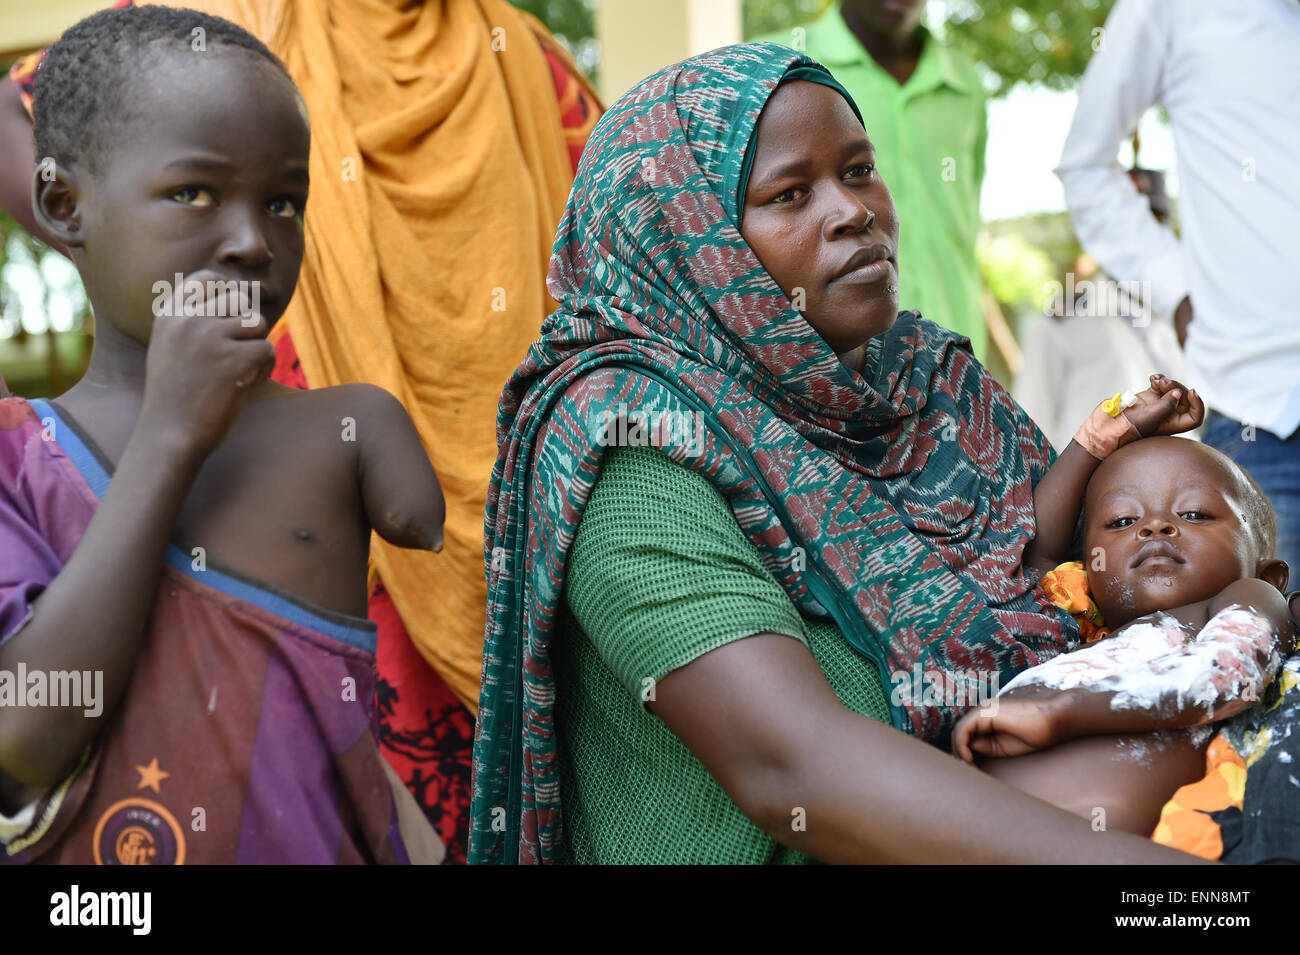 (150508) --DADAAB, May 8, 2015 (Xinhua) -- A Somali refugee mother with her children pose for photos at Dadaab refugee camp in Kenya, May 8, 2015. Dadaab, the world's largest refugee camp in northeastern Kenya, currently houses some 350,000 people. For more than 20 years, it has been home to generations of Somalis who have fled their homeland wracked by conflicts. (Xinhua/Sun Ruibo) Stock Photo